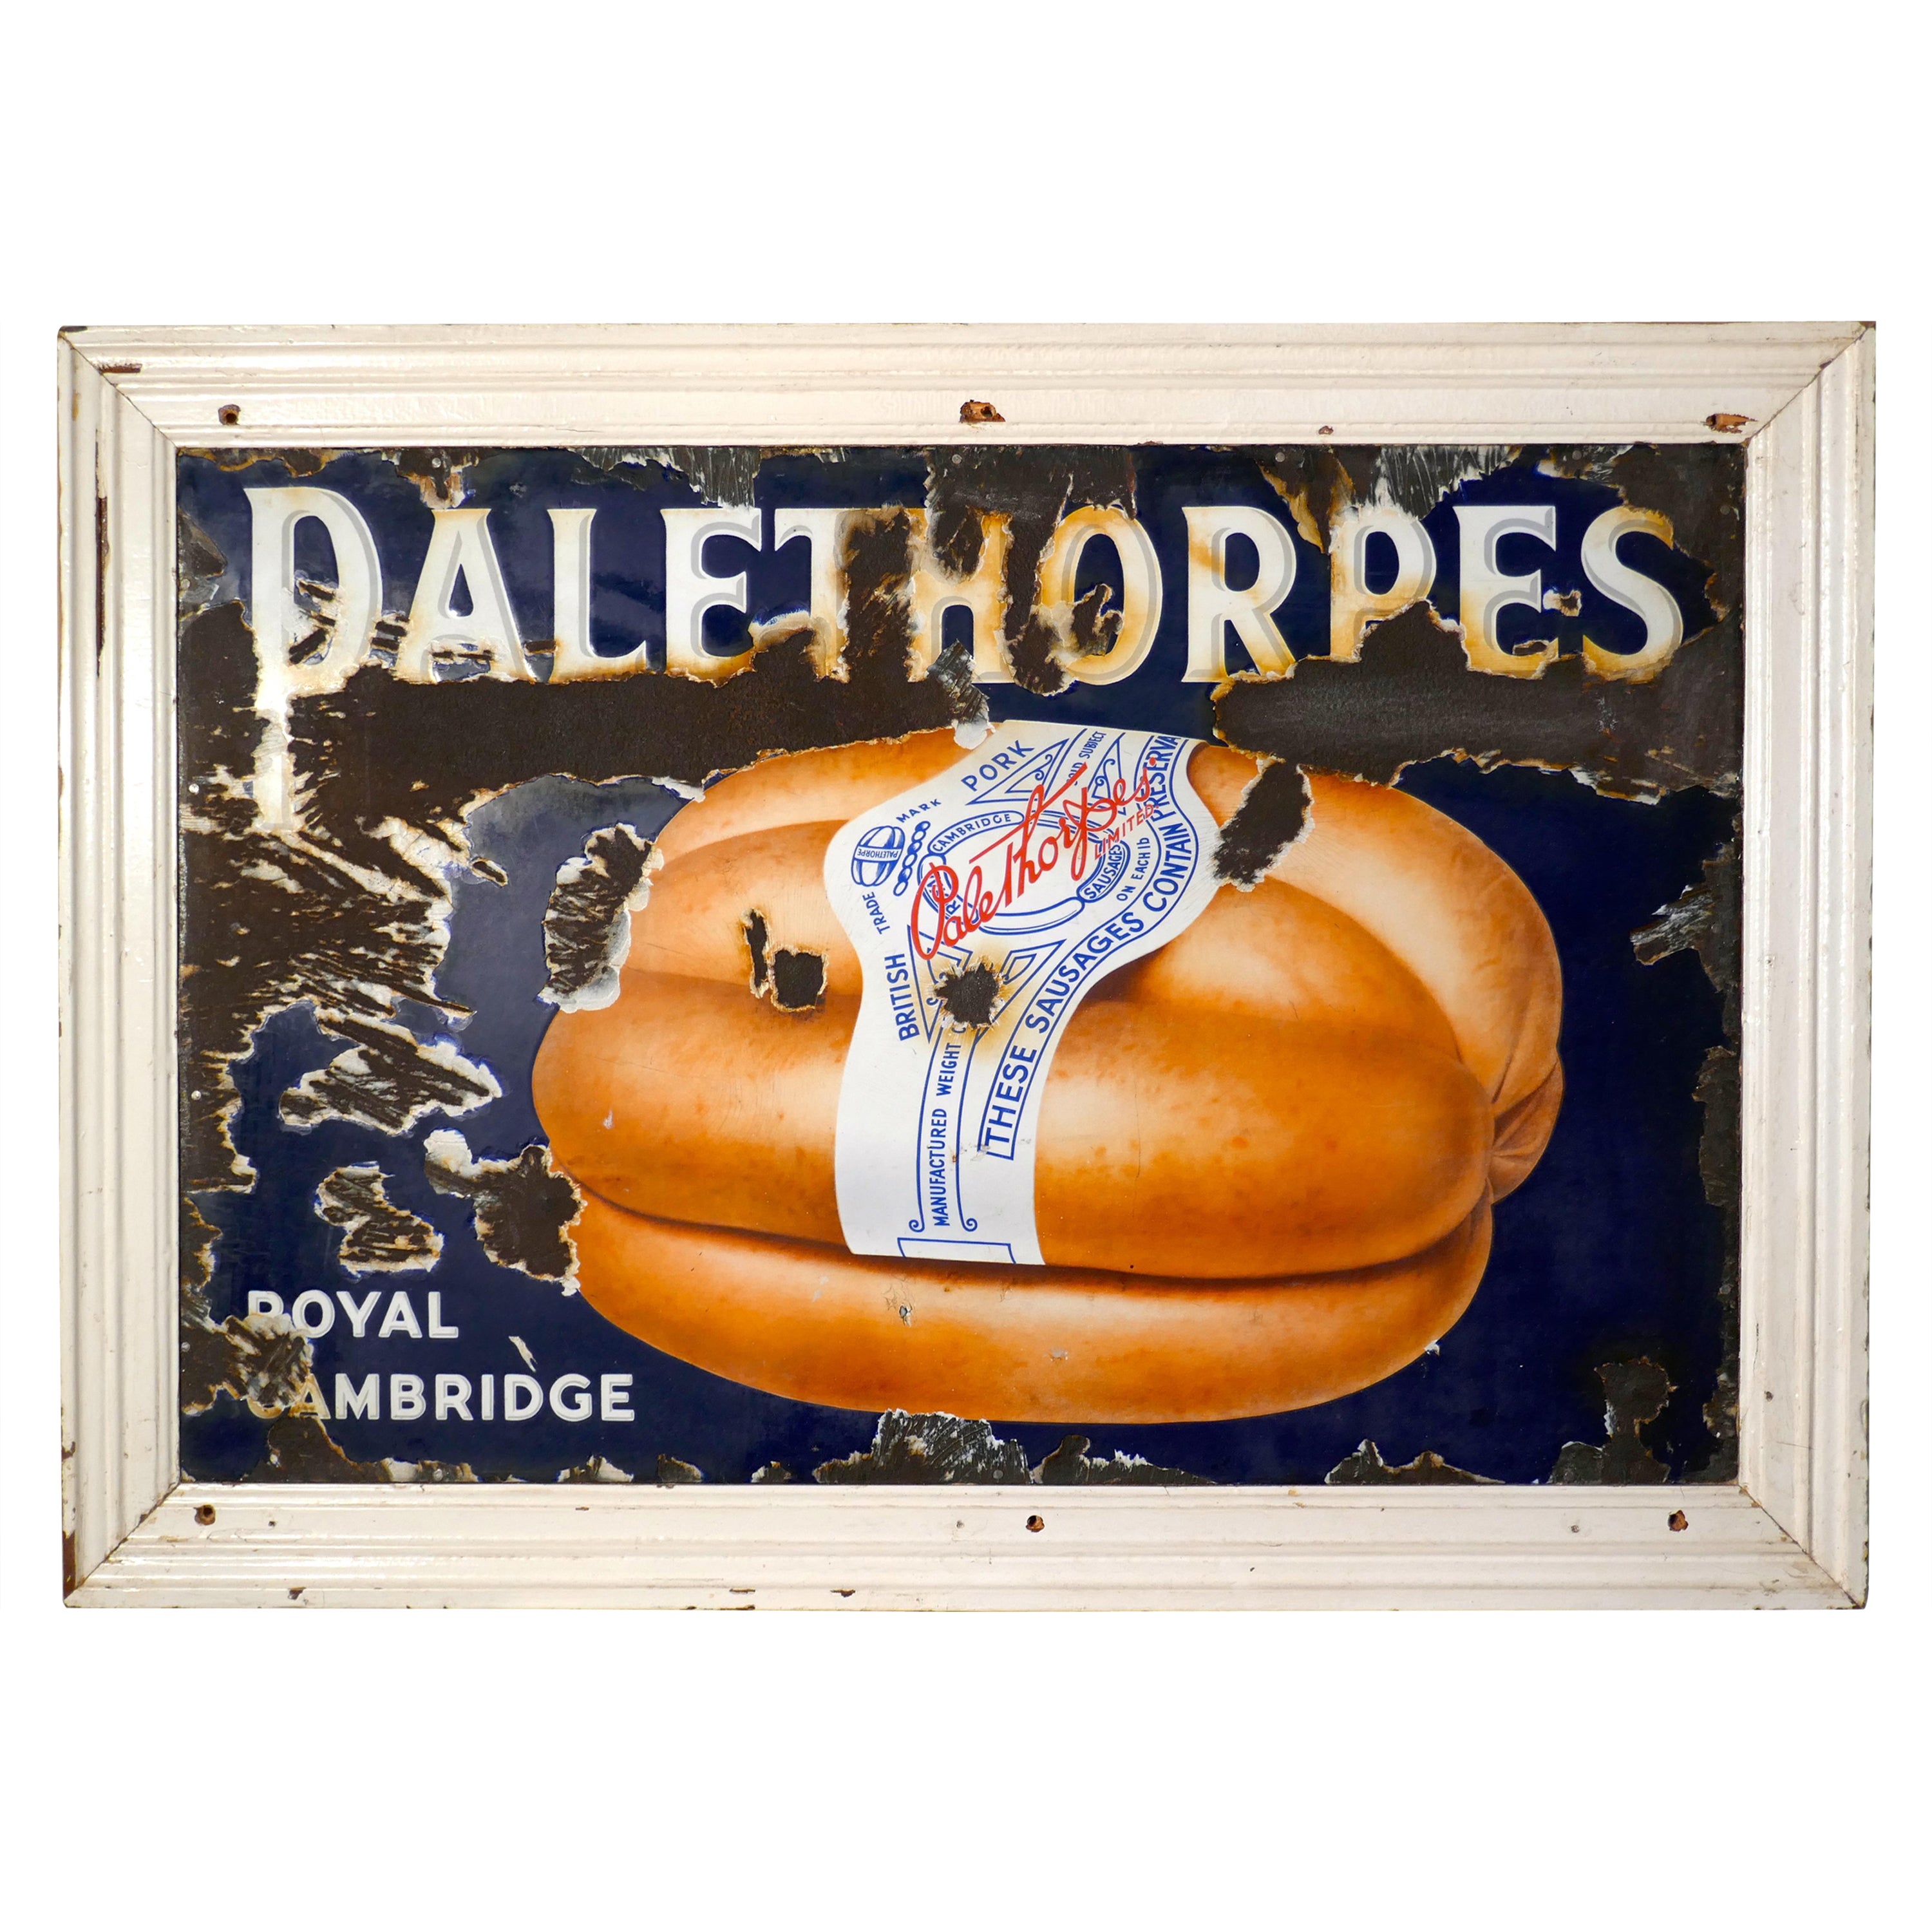 Large Early 20th century Palethorps Pictorial Enamel Sausage Sign  Very Rare  For Sale